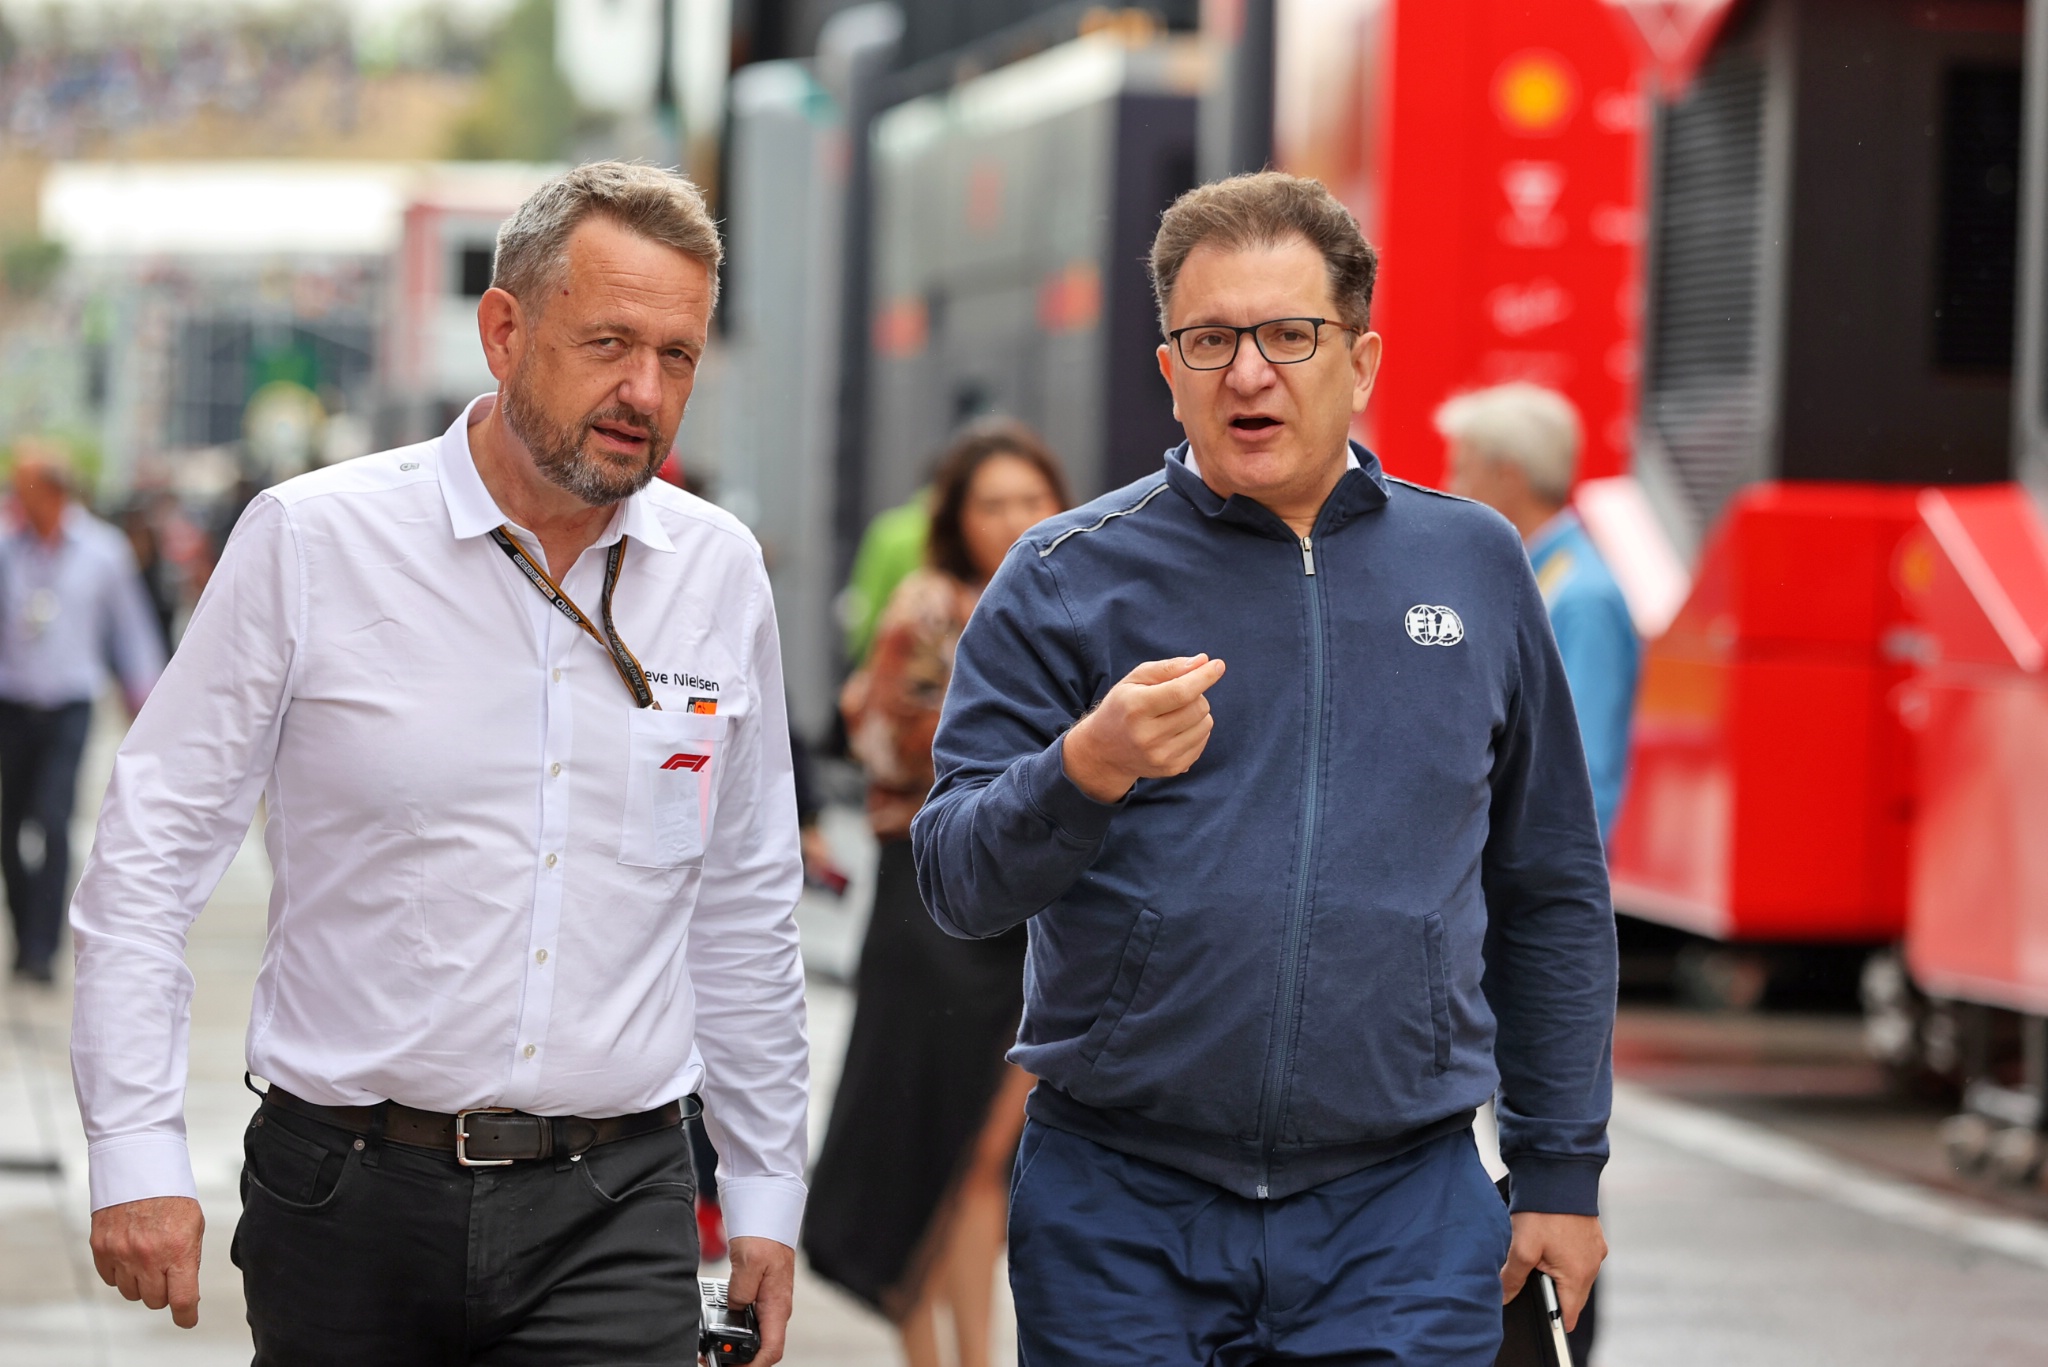 (L to R): Steve Nielsen (GBR) FOM Sporting Director with Nicholas Tombazis (GRE) FIA Head of Single-Seater Technical